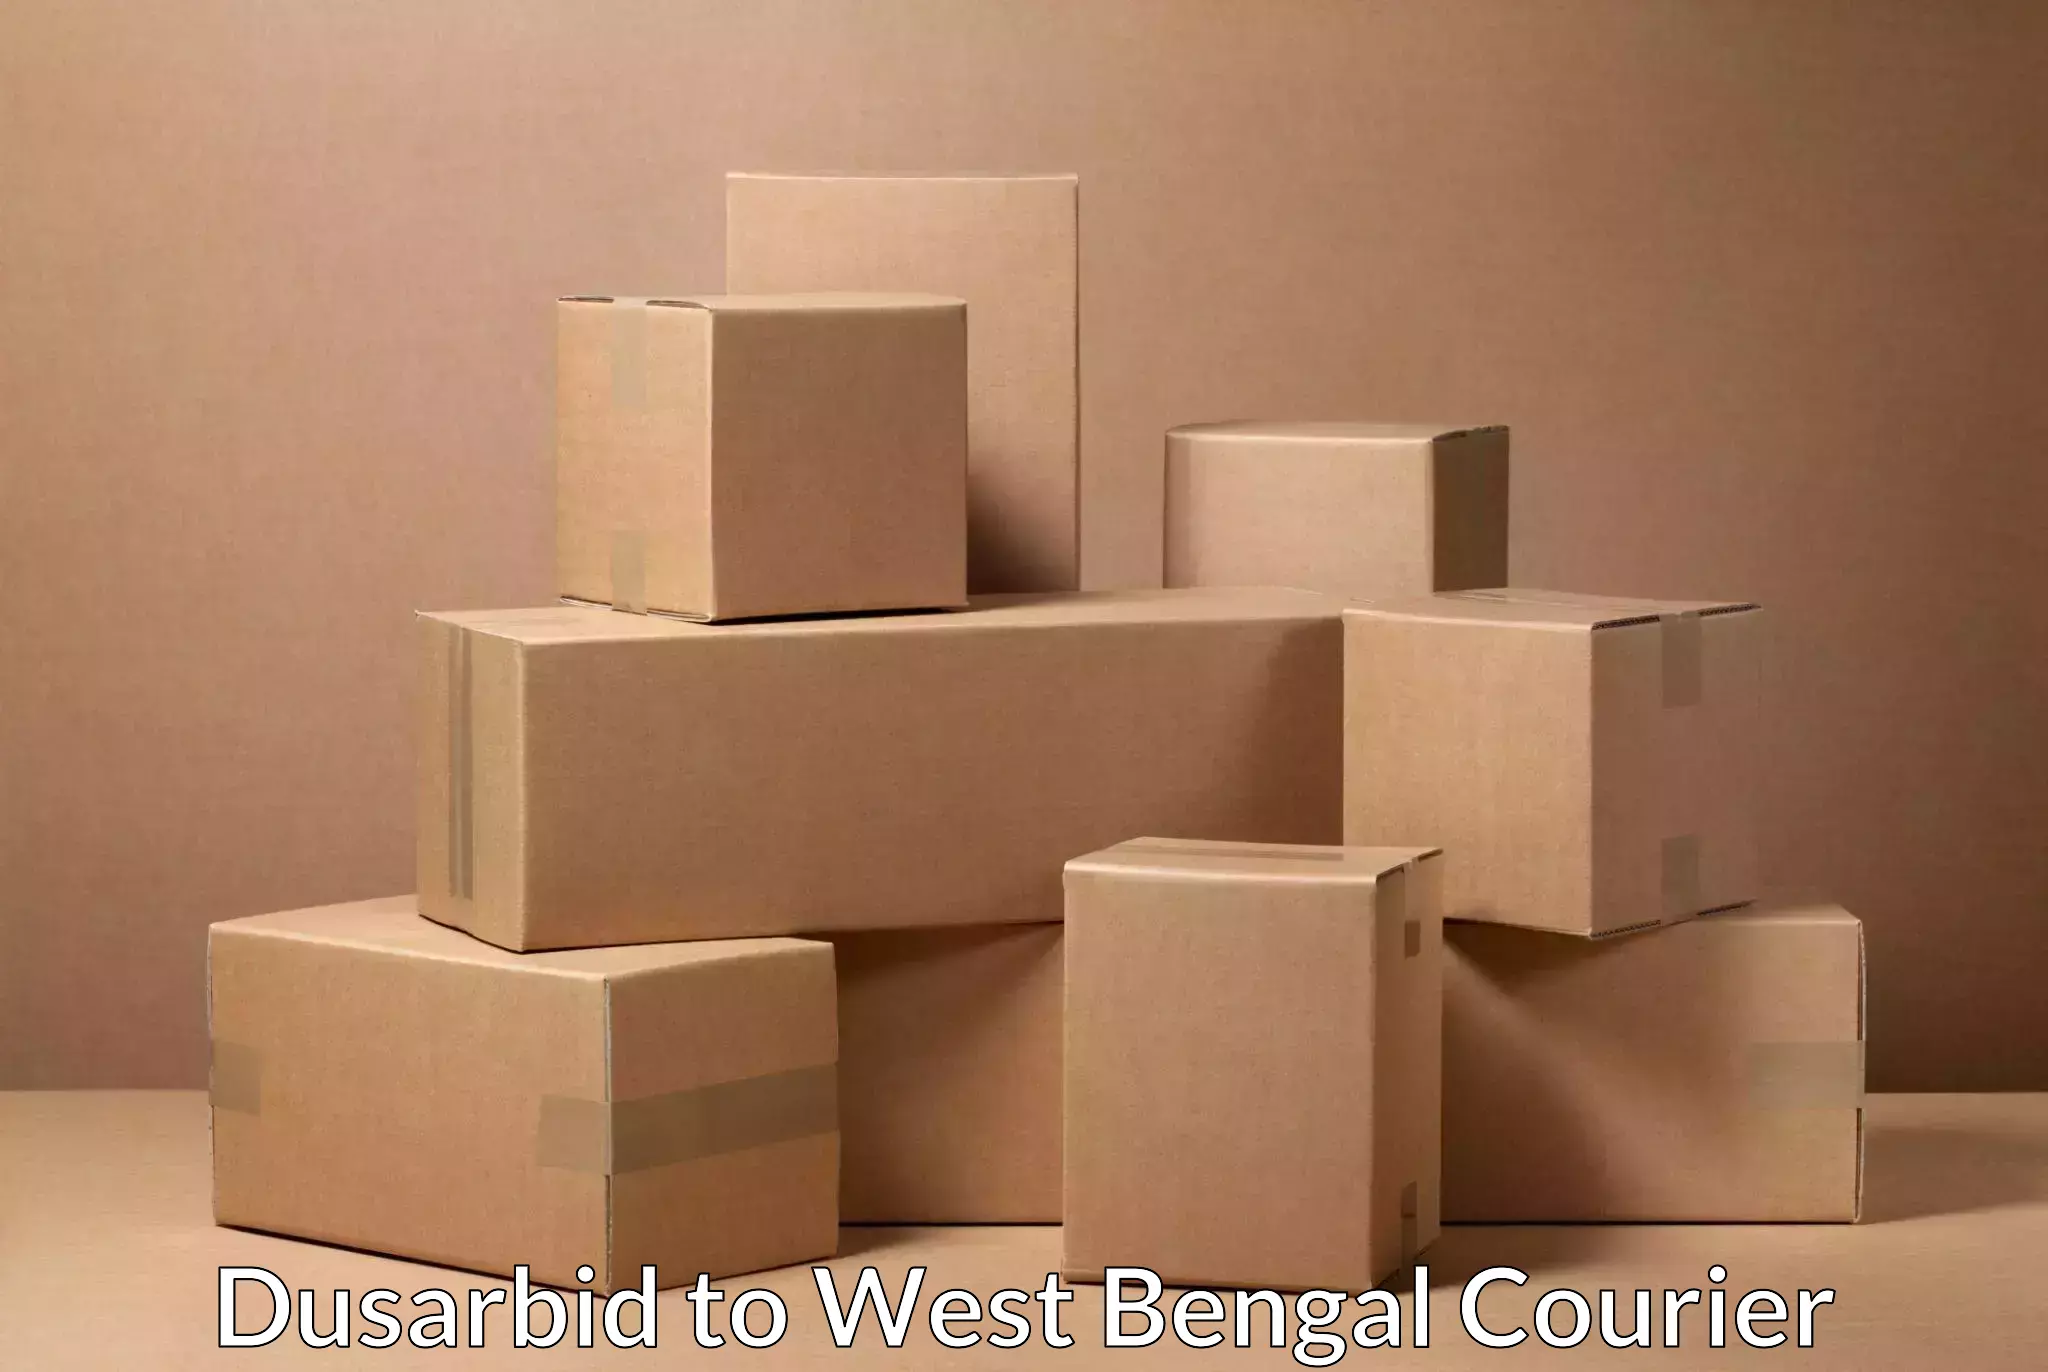 Specialized courier services in Dusarbid to Kalna